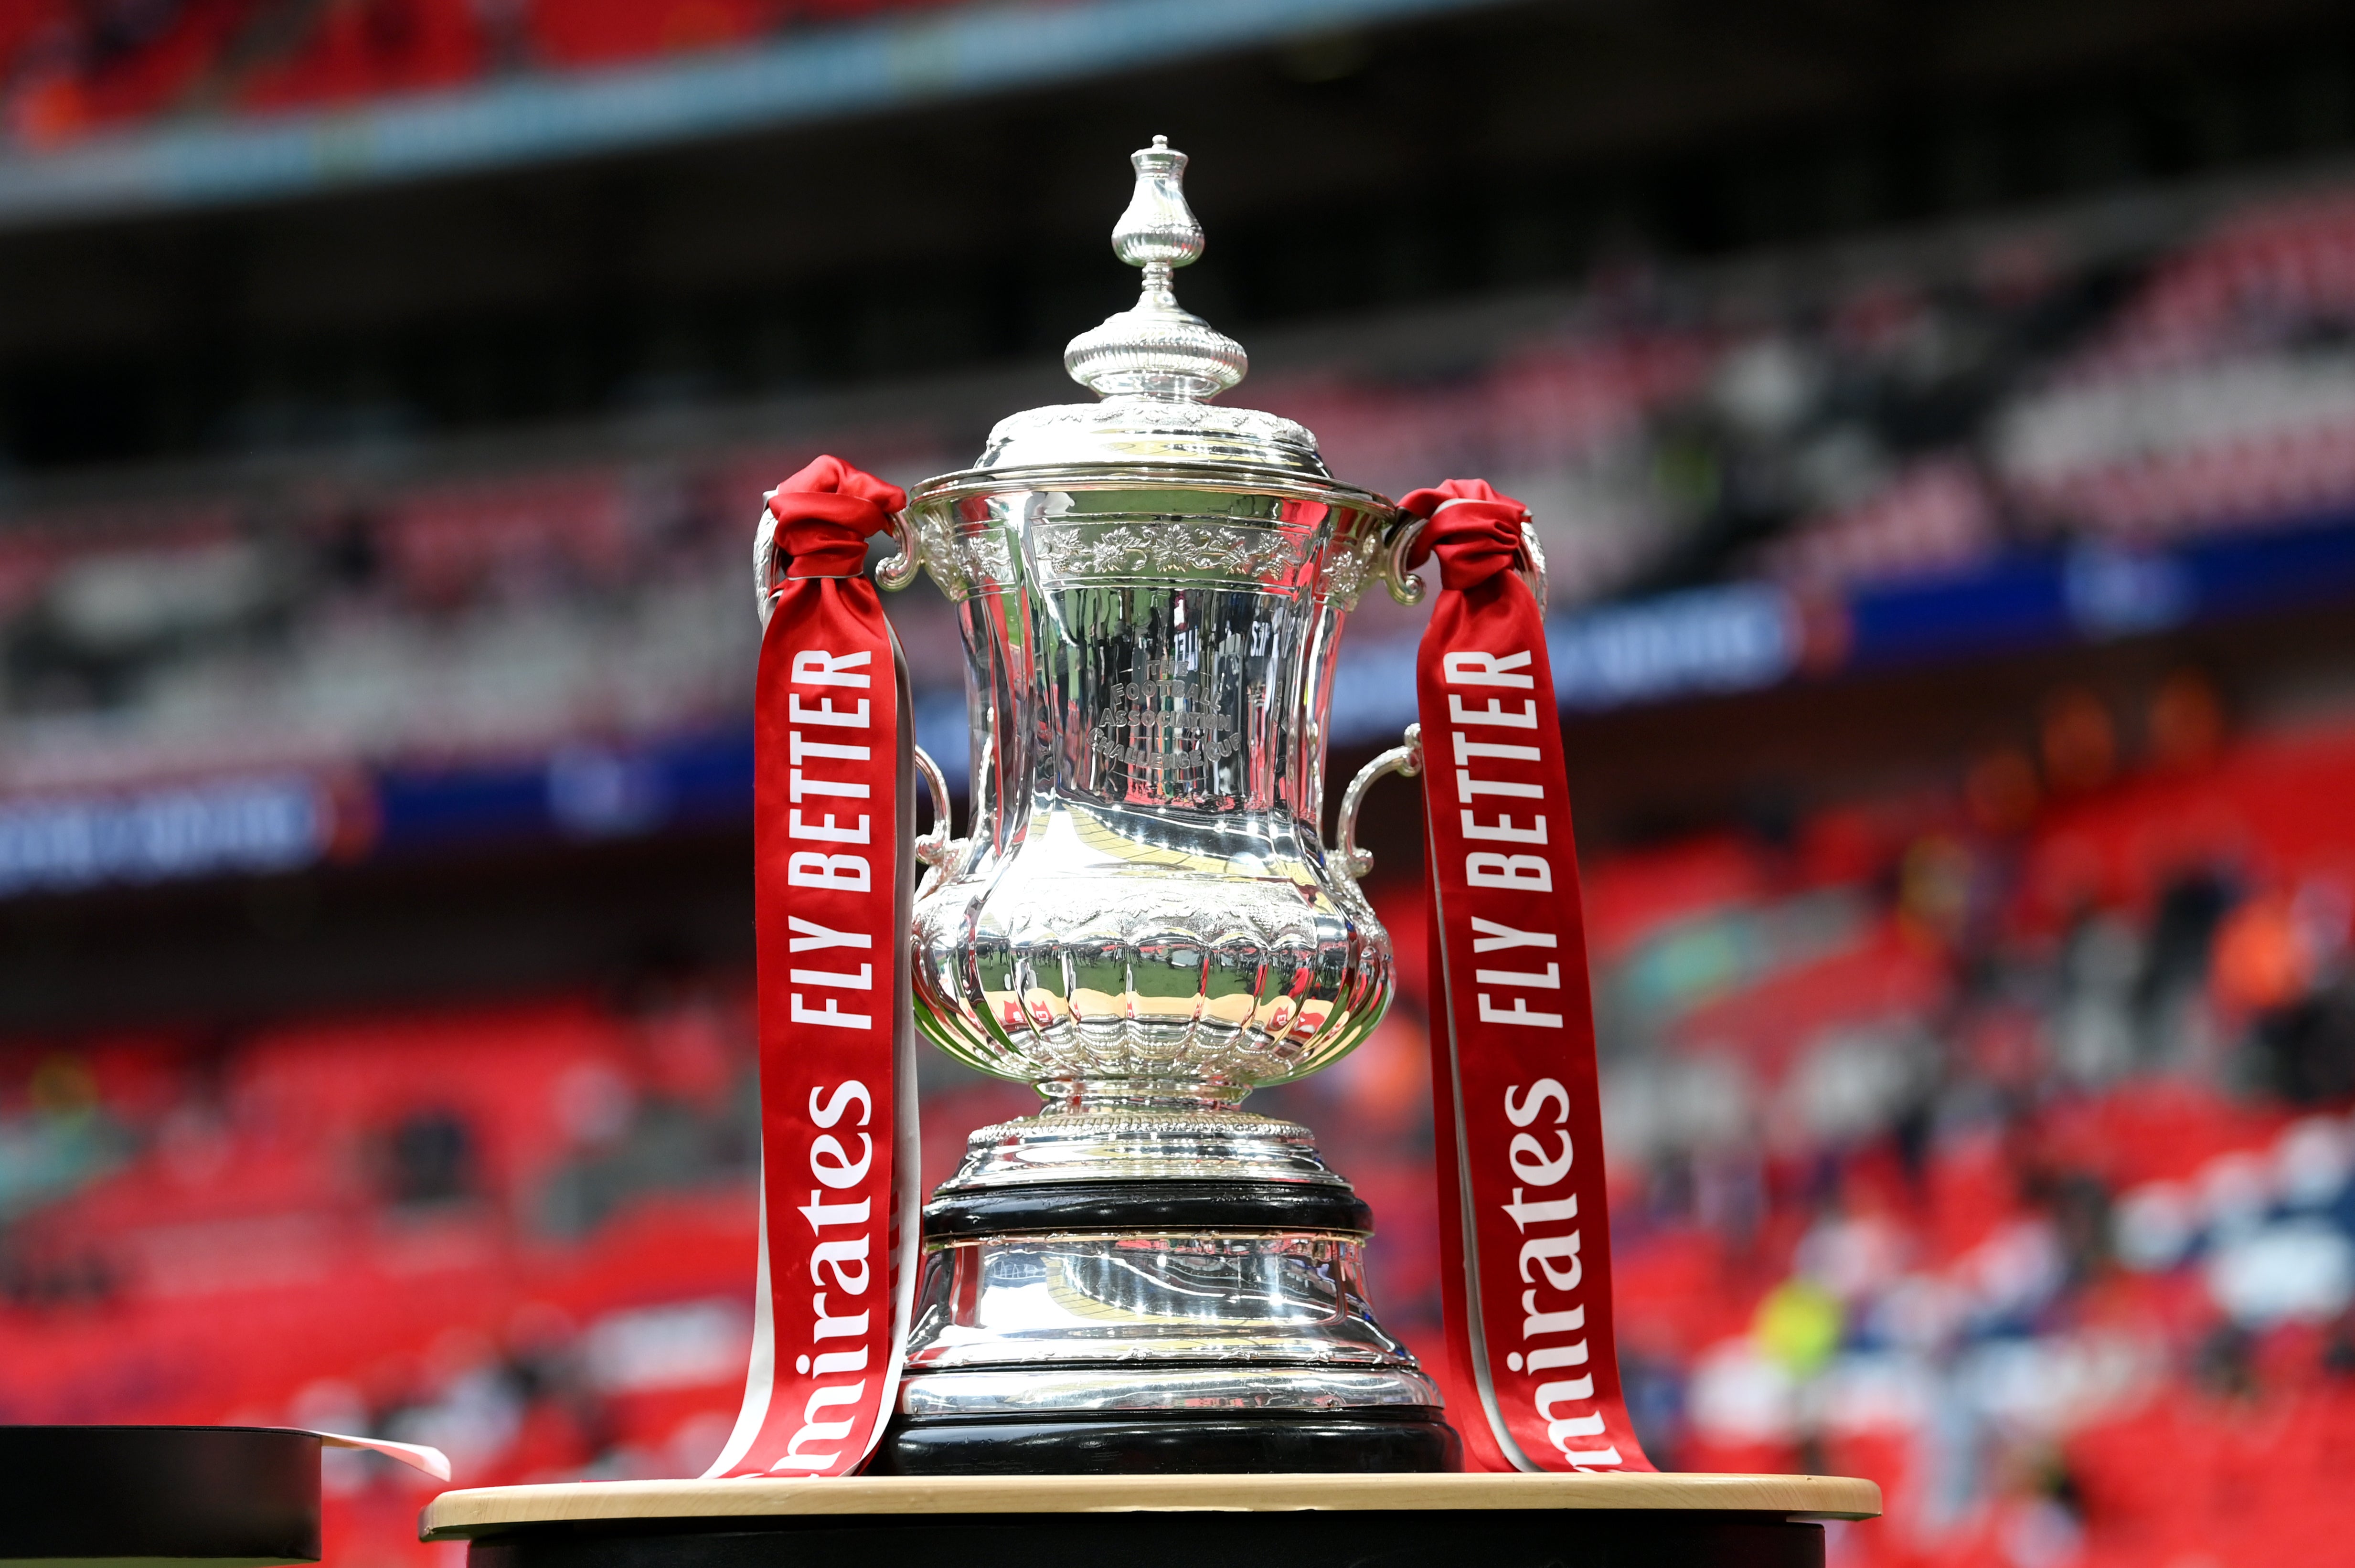 When is the FA Cup second round draw? The Independent